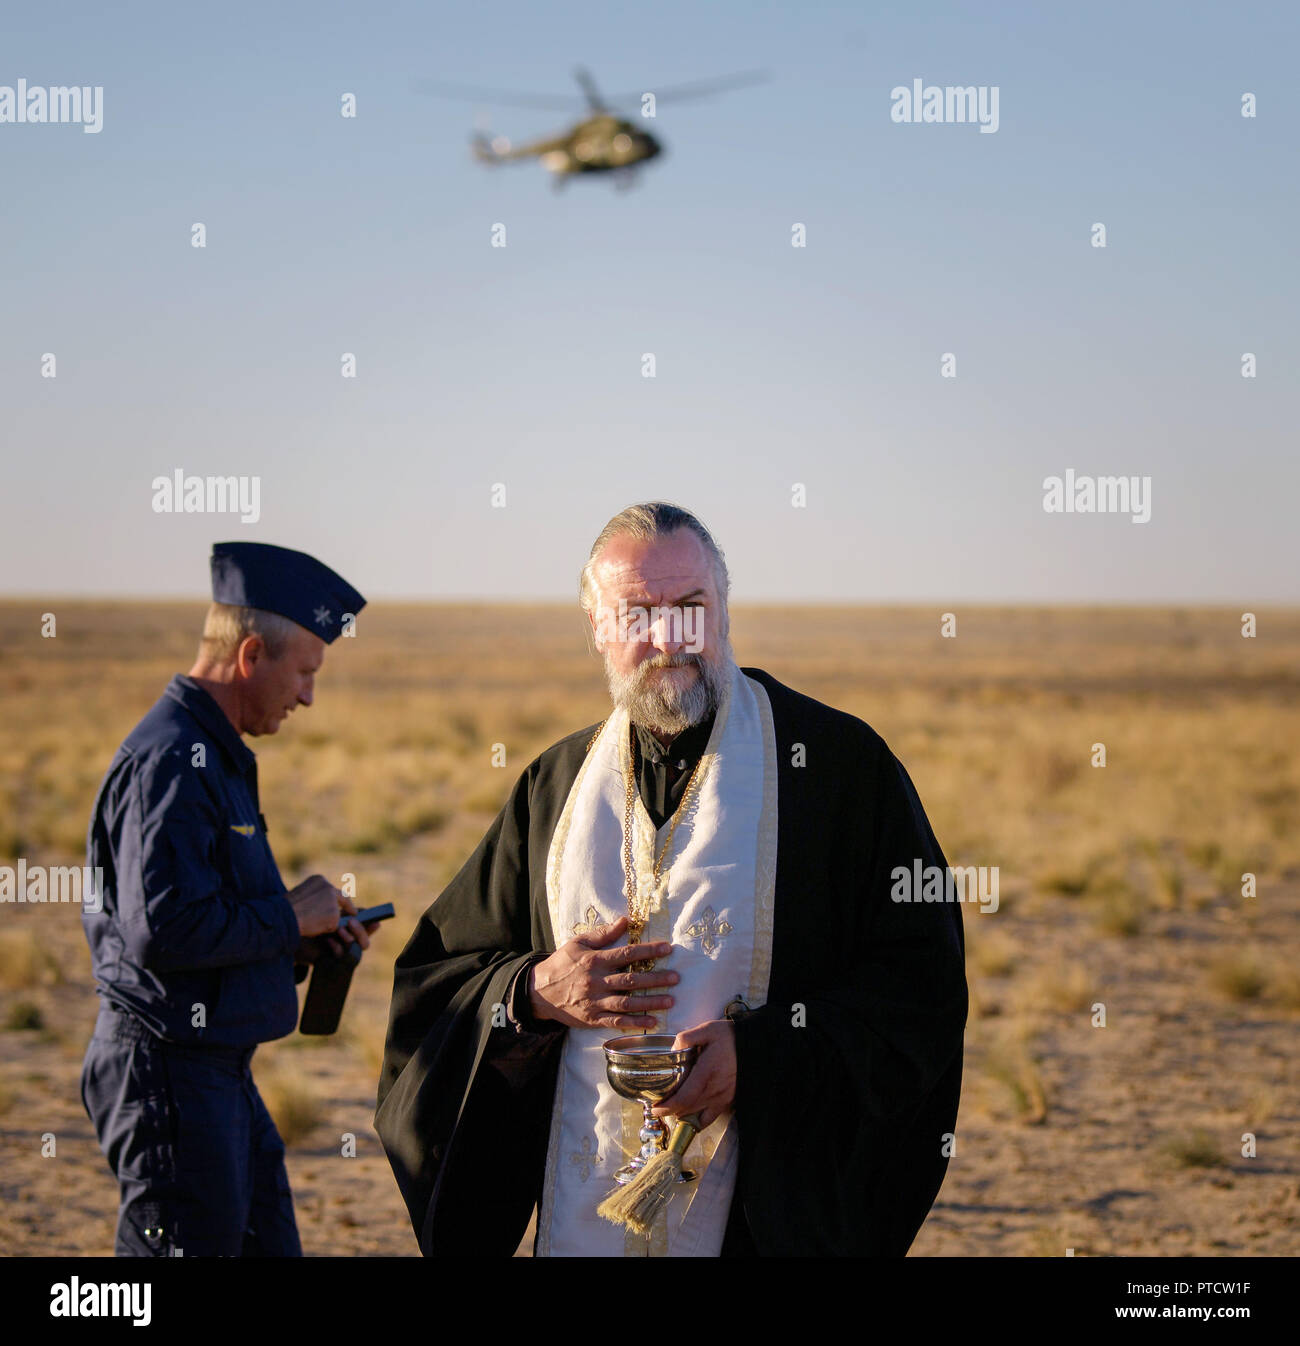 Russian Orthodox Priest, Father Alexander, watches over the landing zone after the International Space Station Expedition 56 crew members Ricky Arnold of NASA, Flight Engineer and Soyuz Commander Oleg Artemyev of Roscosmos, and Expedition 56 Commander Drew Feustel of NASA landed in the Russian Soyuz MS-08 spacecraft October 4, 2018 in Zhezkazgan, Kazakhstan. Stock Photo